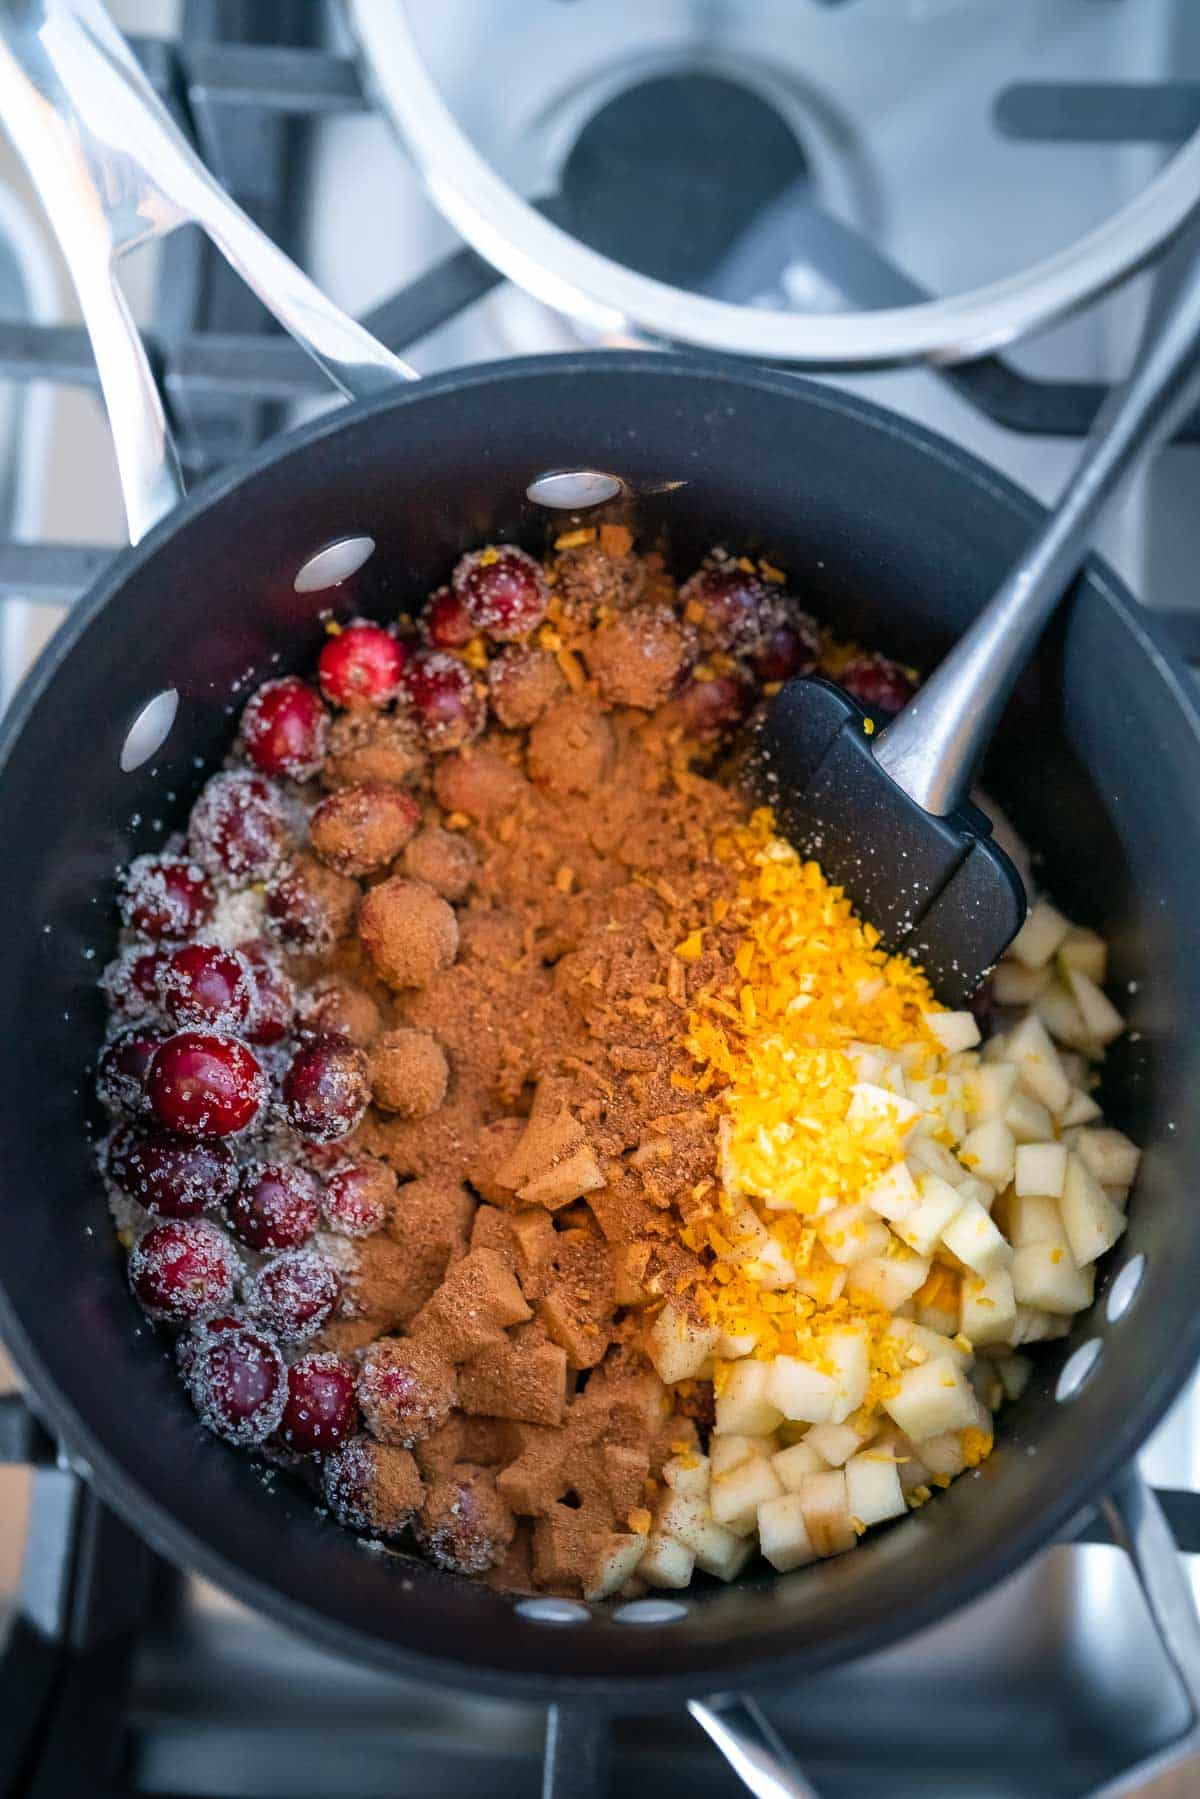 Cranberries, diced apples, and cinnamon layered inside of a black pot on the stove.